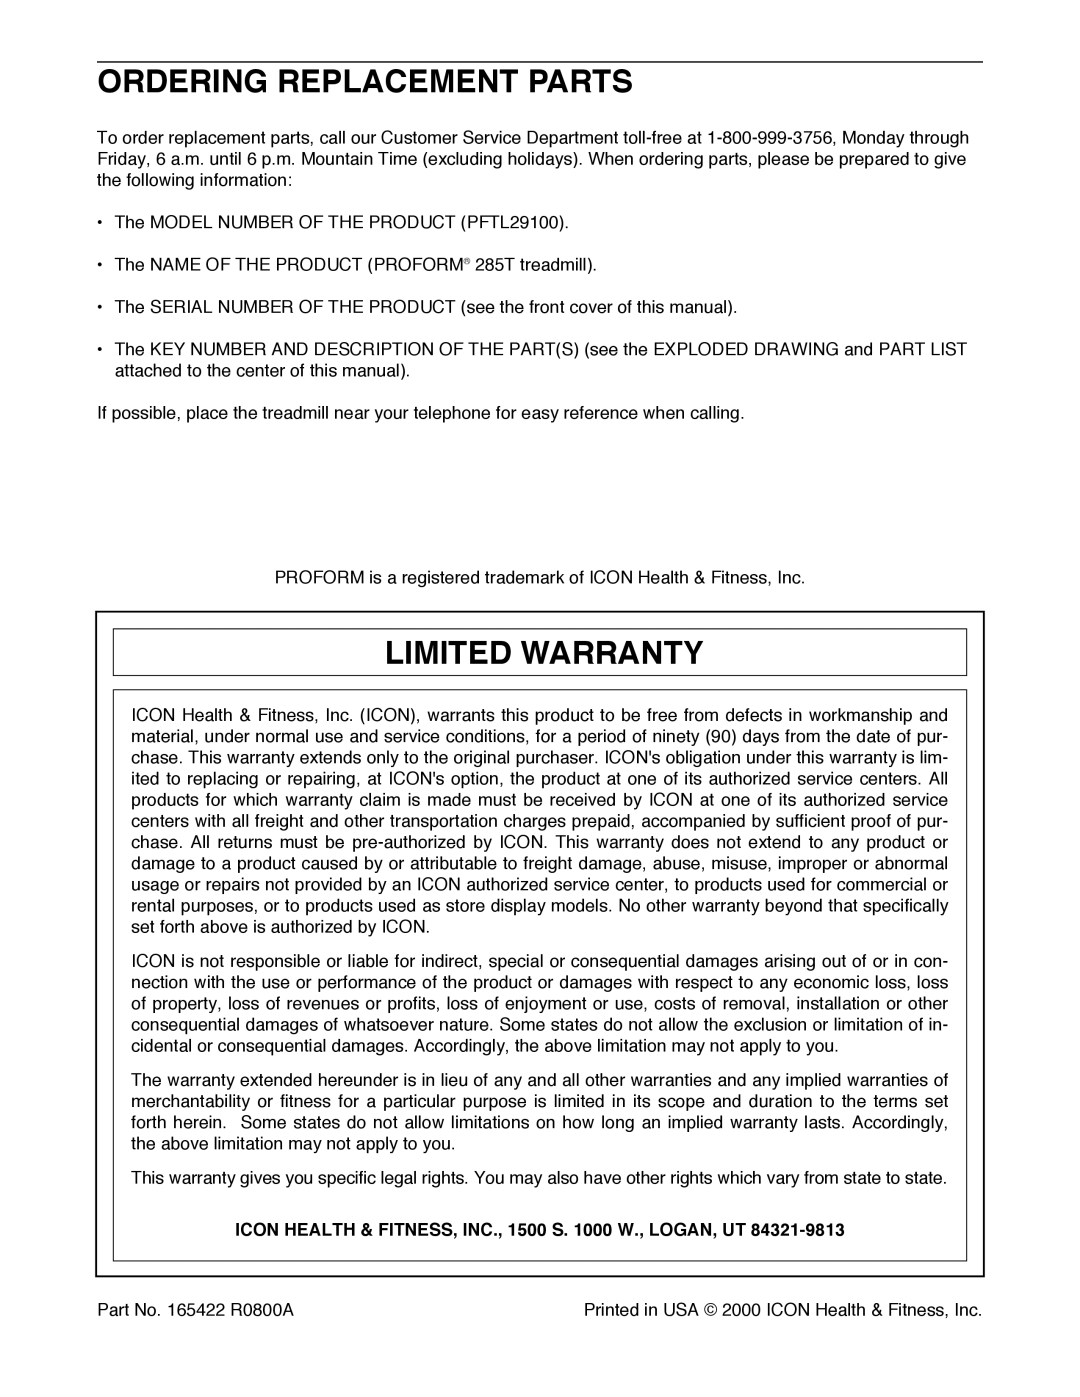 ProForm PFTL29100 Ordering Replacement Parts, Limited Warranty, Icon Health & FITNESS, INC., 1500 S W., LOGAN, UT 